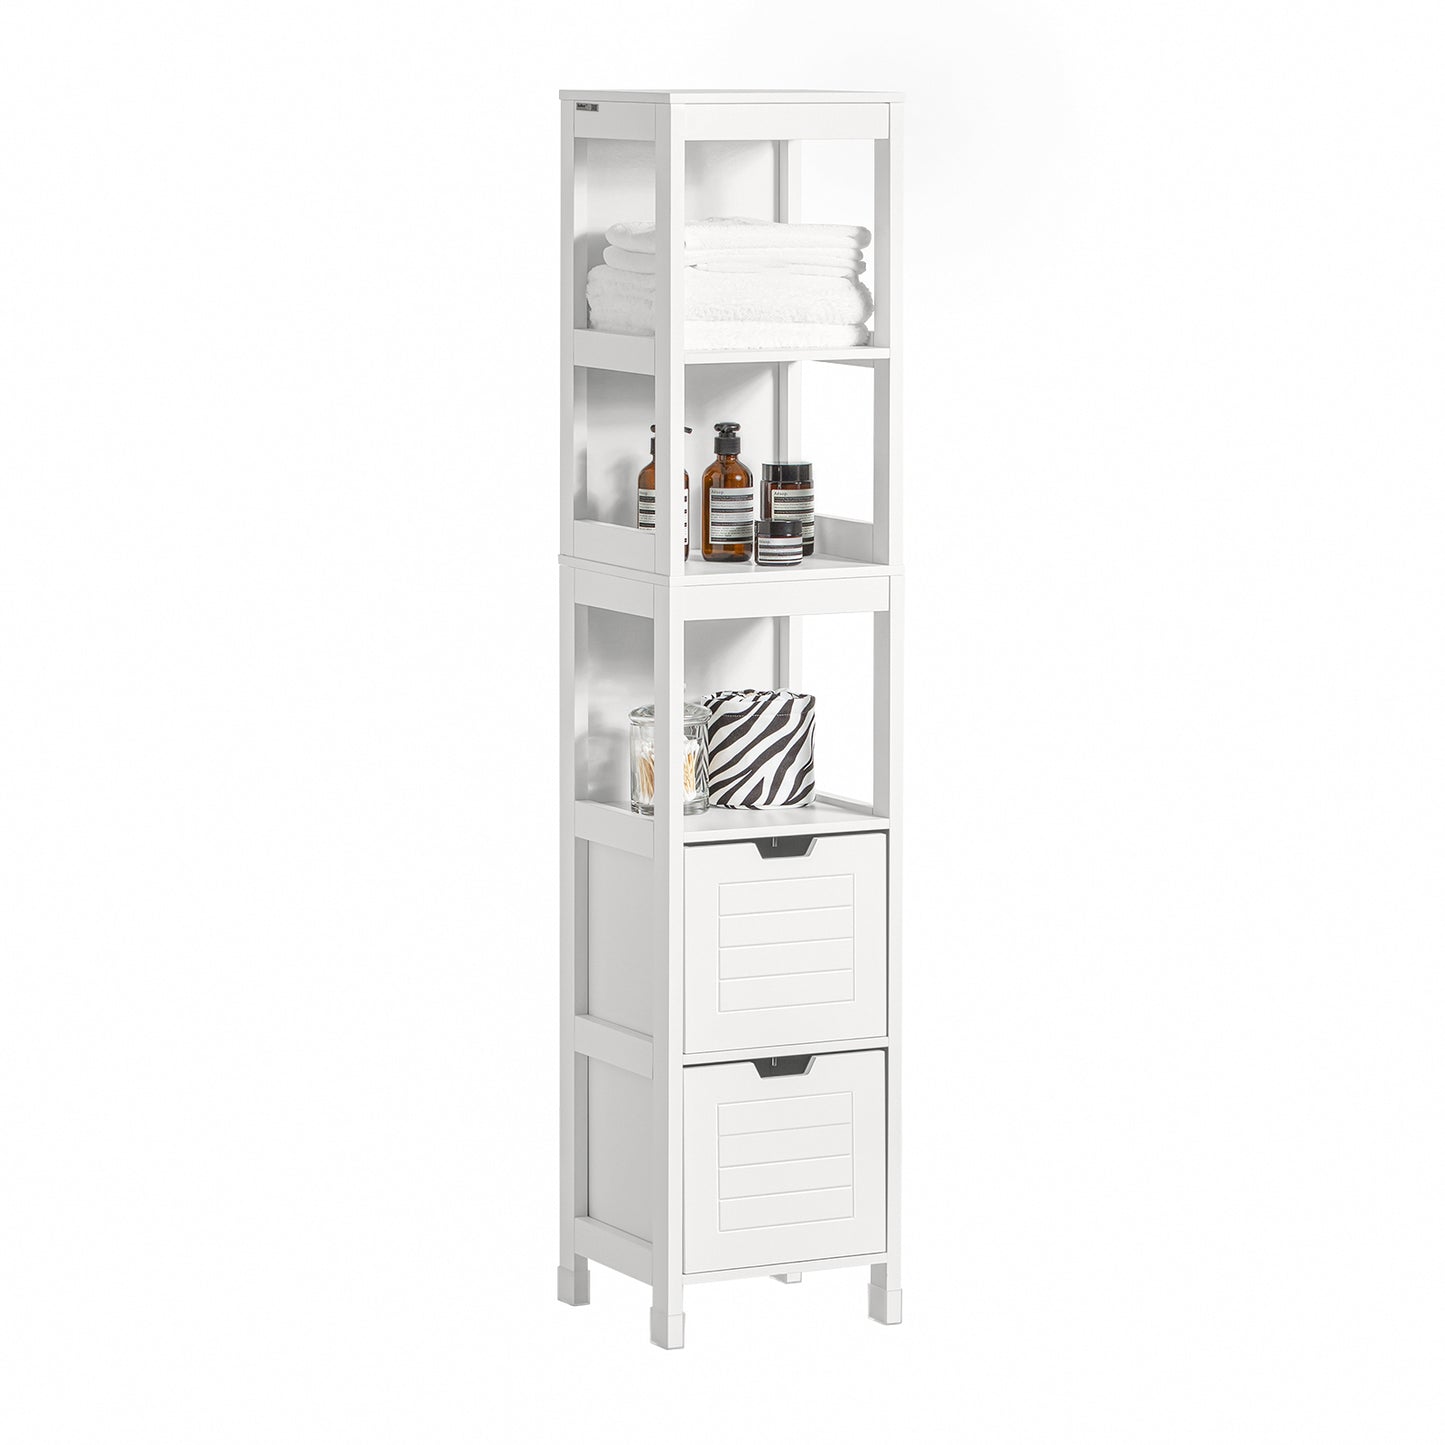 SoBuy Freestanding Tall Cabinet, Tall Cupboard, Standing Shelves with Drawers